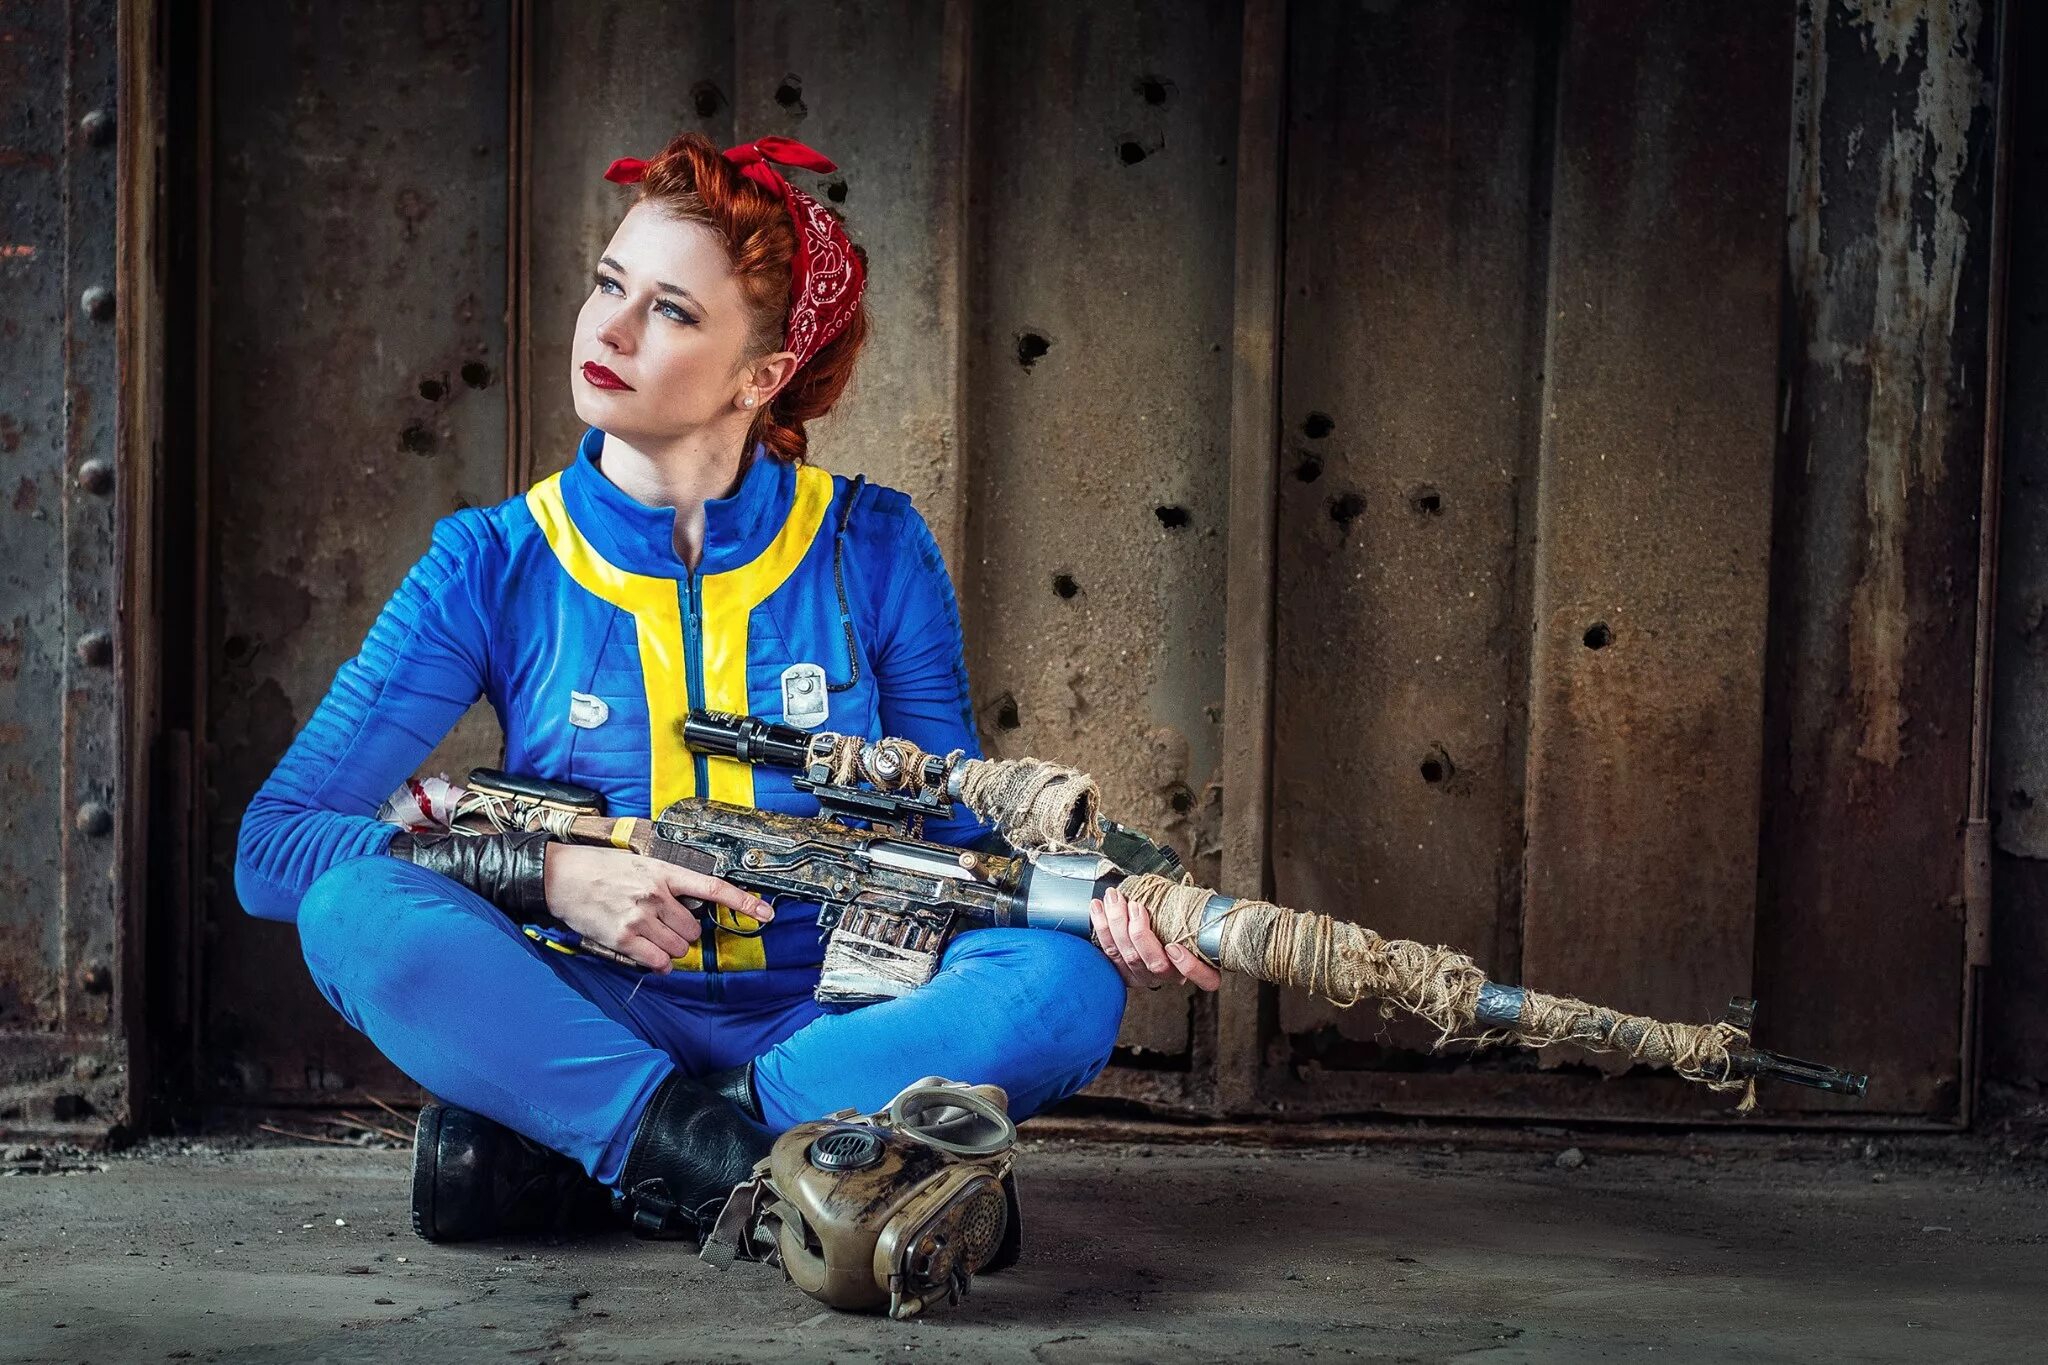 Фоллаут red head sound. Fallout 4 Cosplay. Фоллаут 4 косплей. Fallout 76 косплей. Косплей фоллаут 4 девушка.